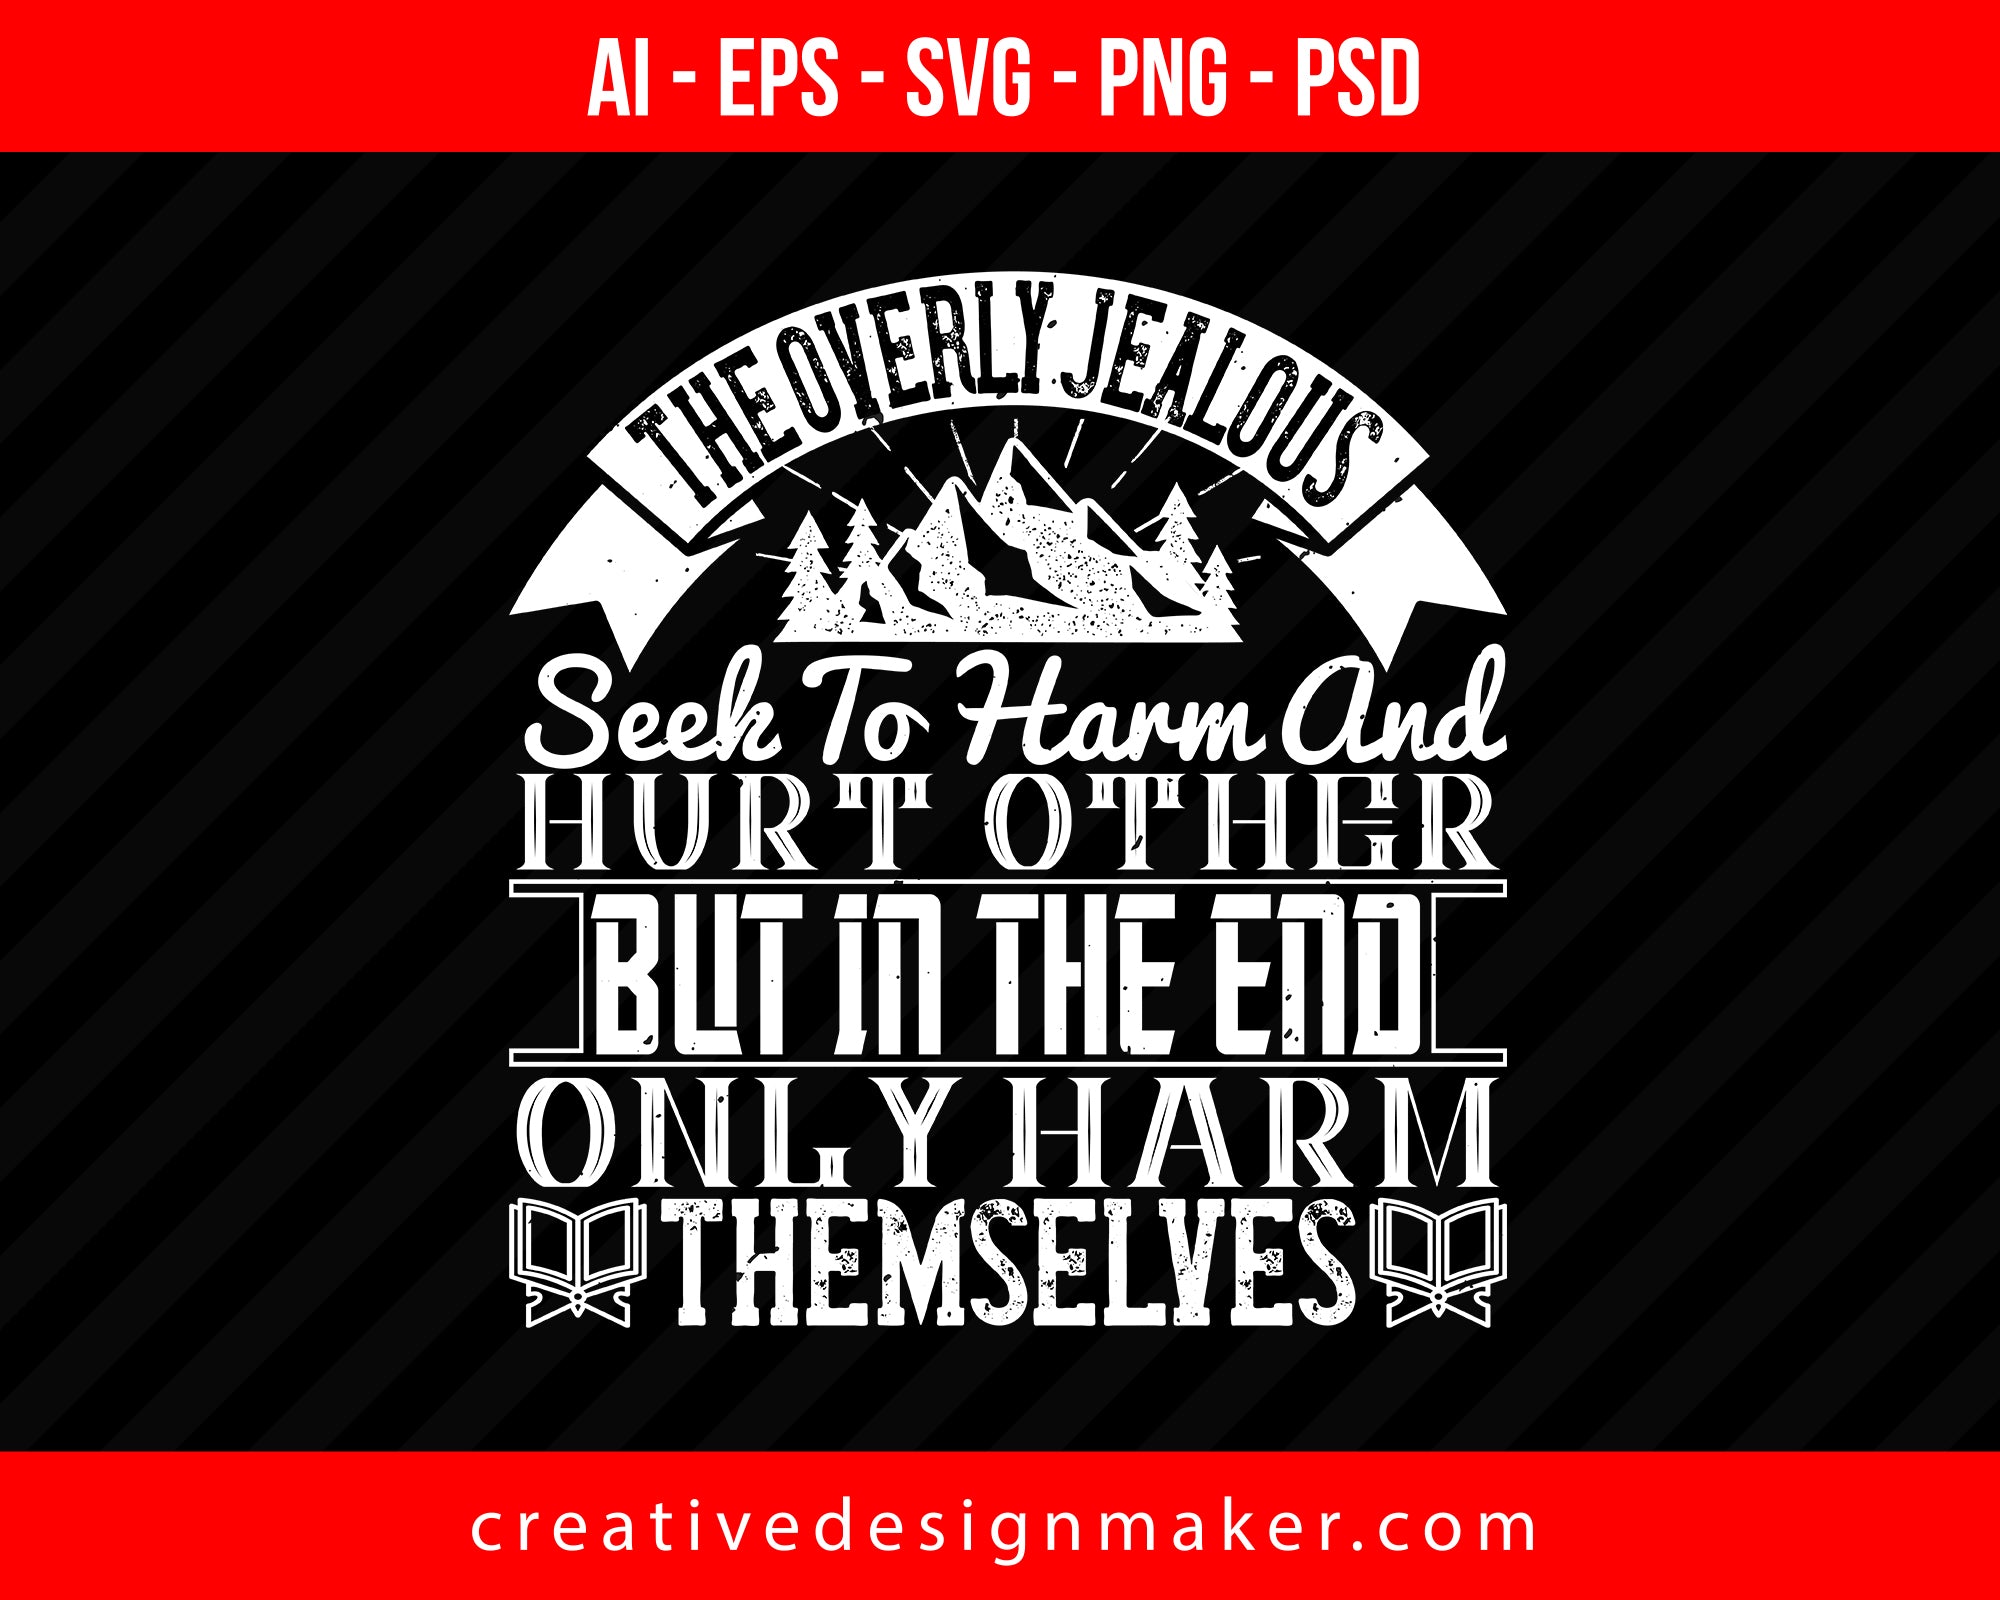 The overly jealous seek to harm and hurt other, but in the end only harm themselves Islamic Print Ready Editable T-Shirt SVG Design!